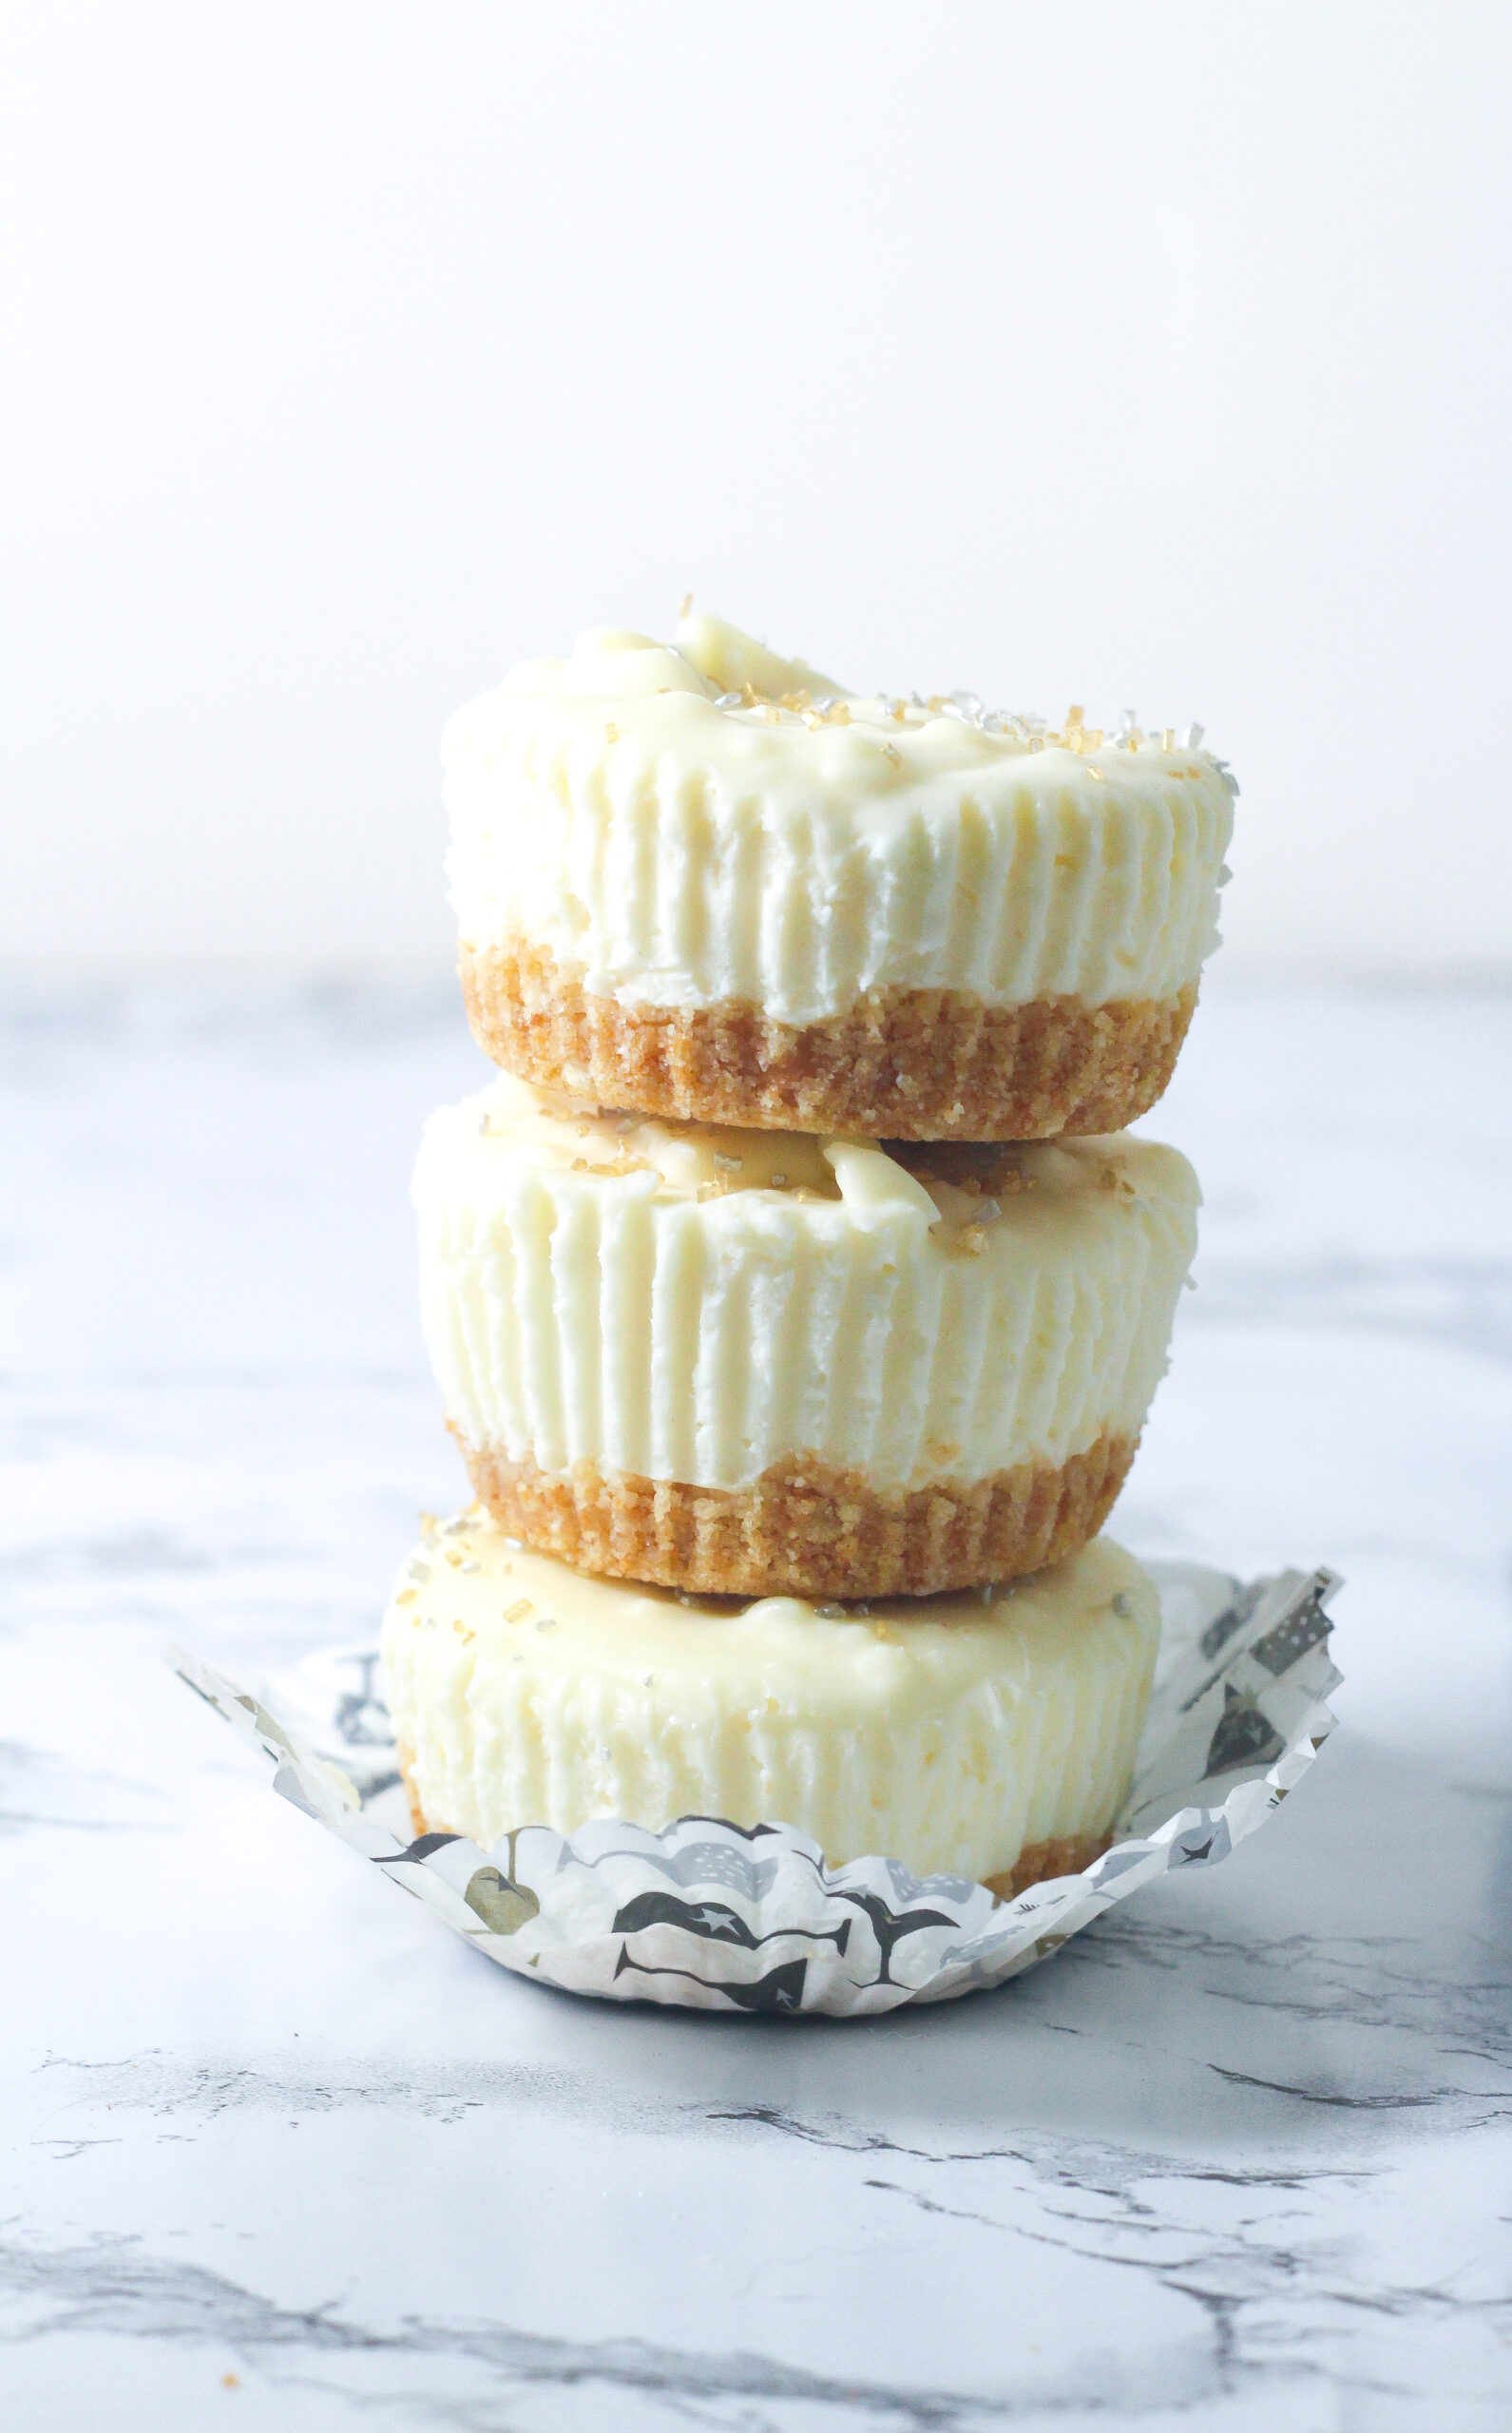 stack of three prosecco cheesecakes in an open cupcake wrapper on a marbled surface